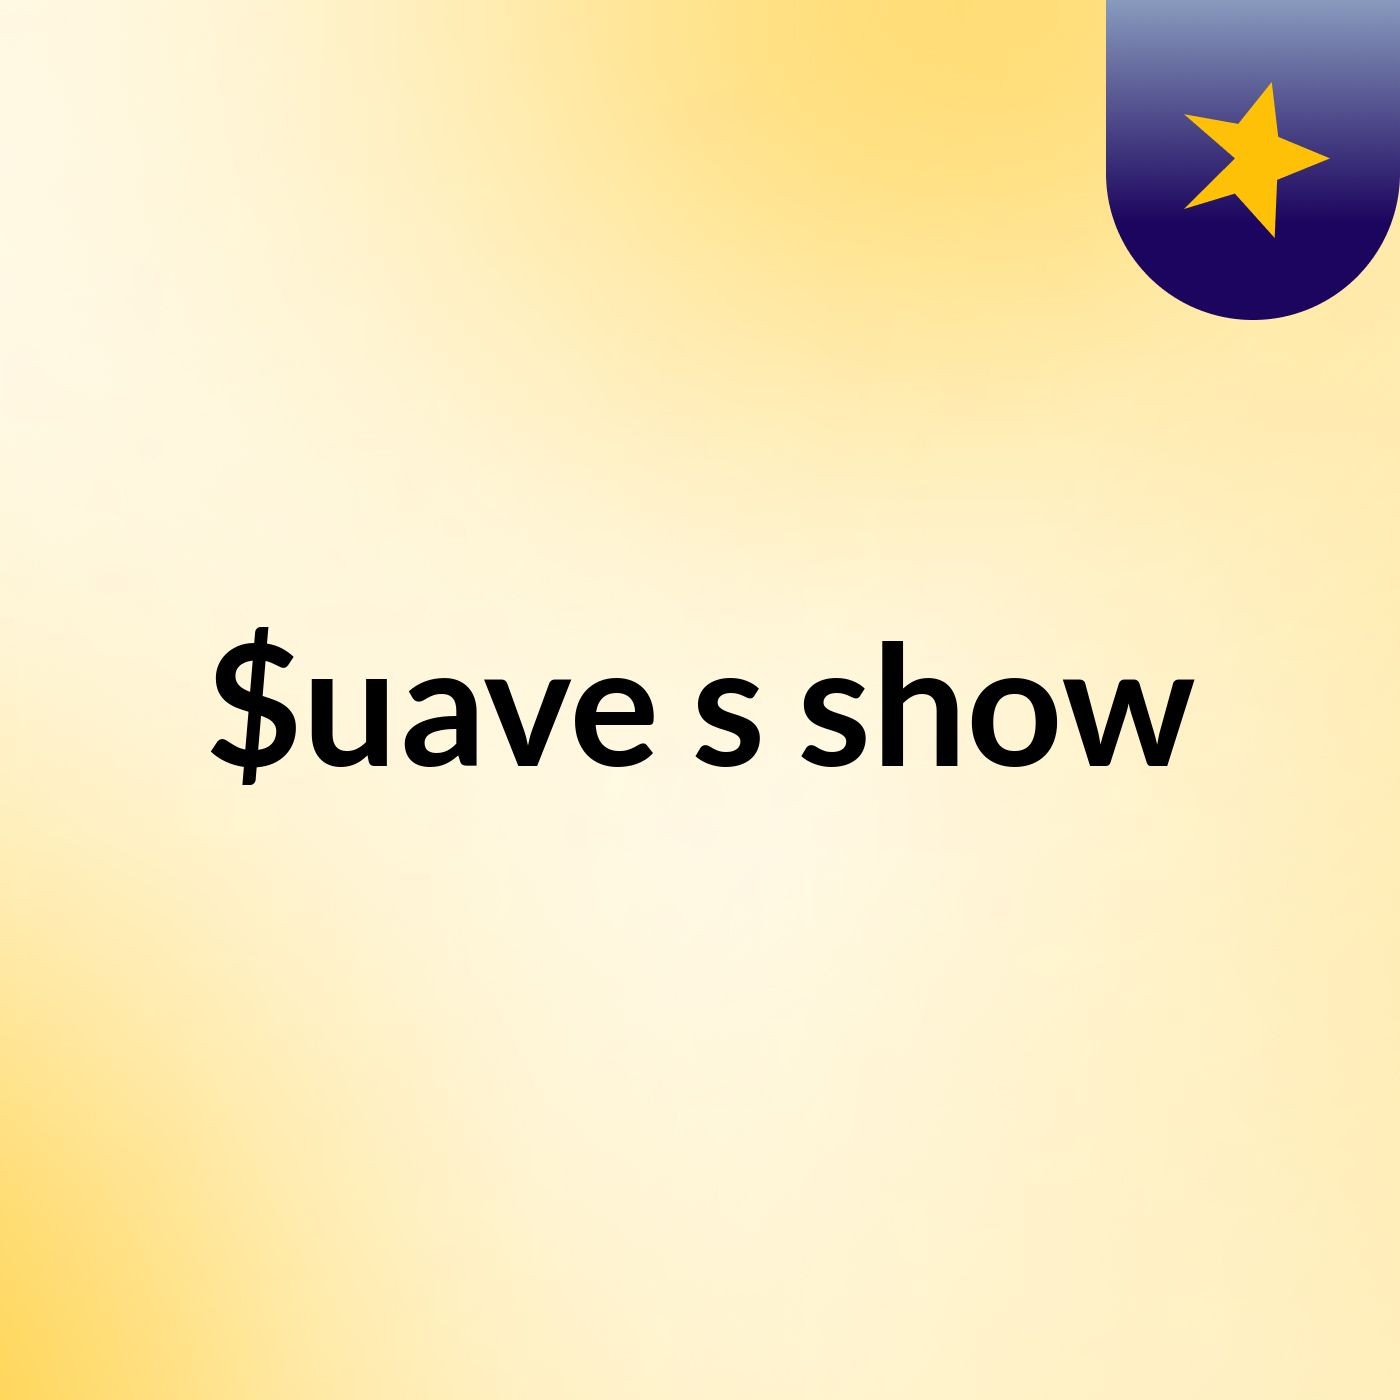 $uave's show